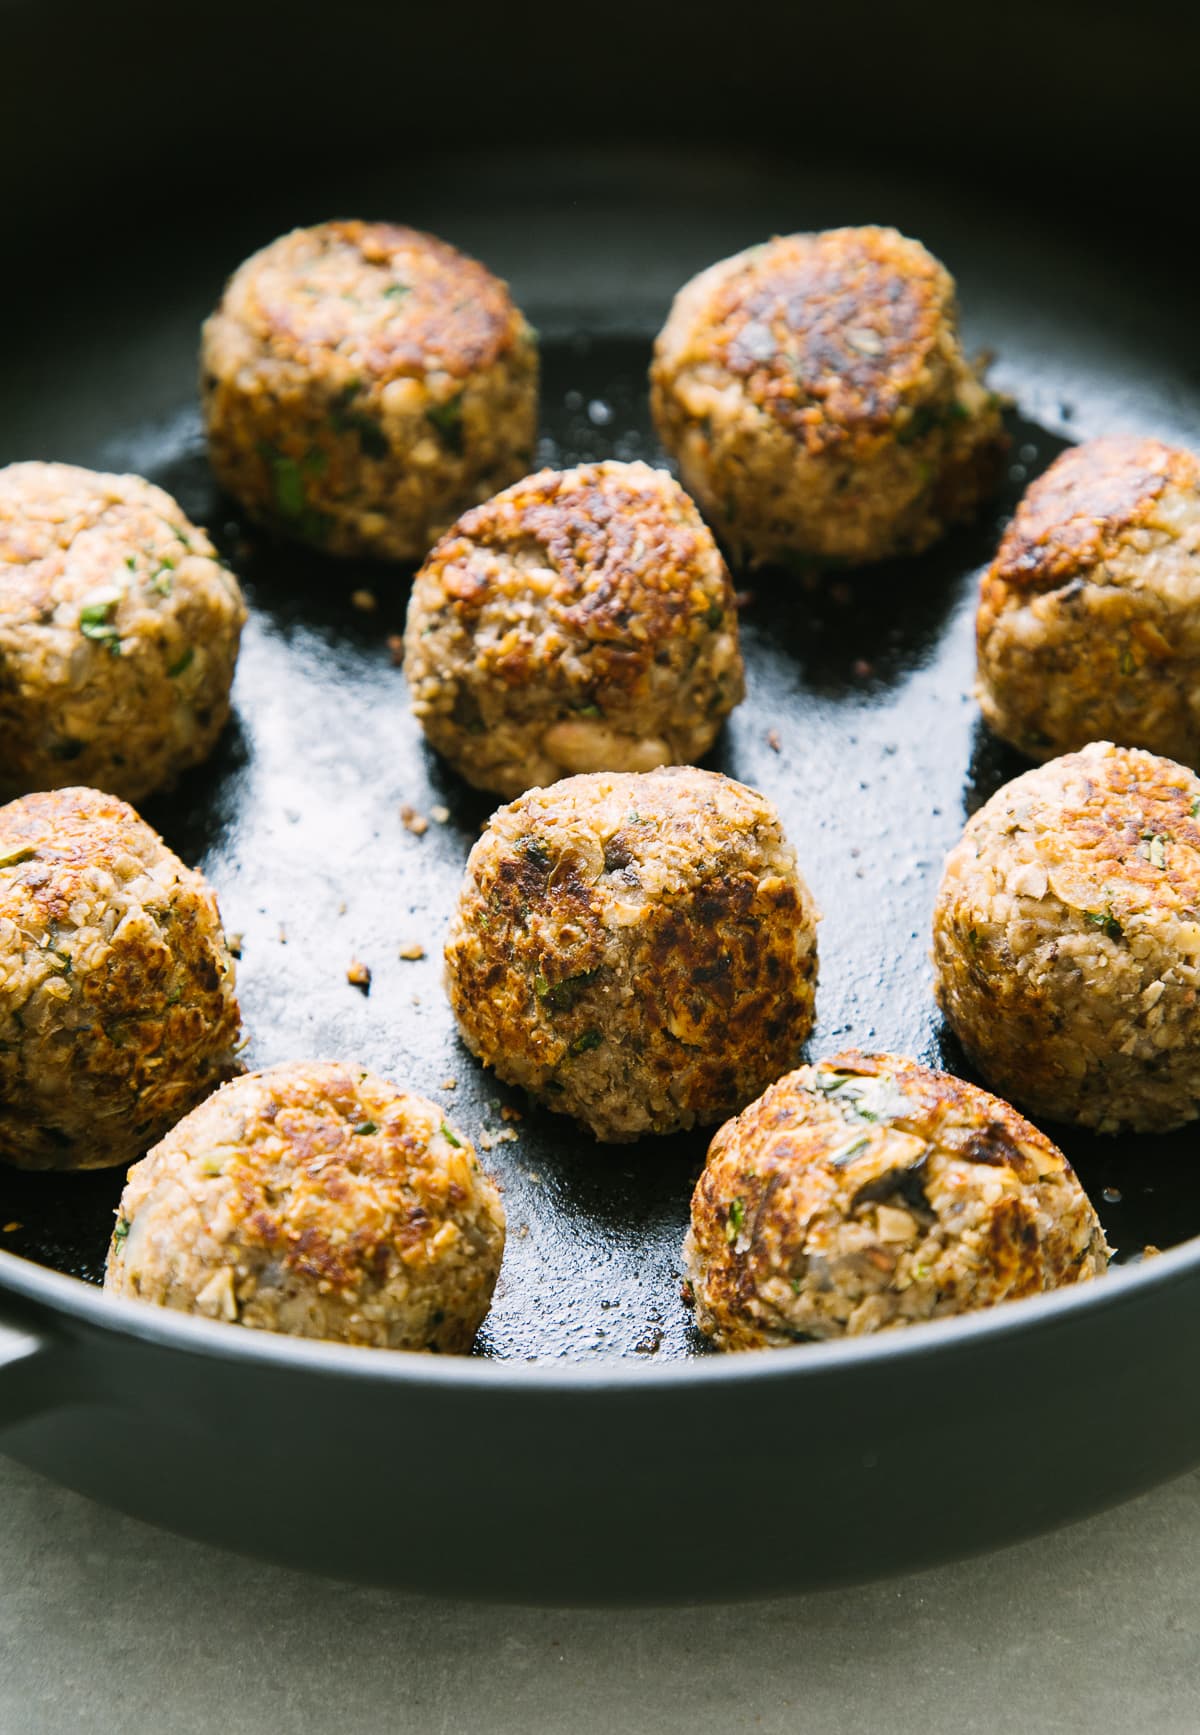 side angle view of freshly made skillet cooked vegan meatballs.